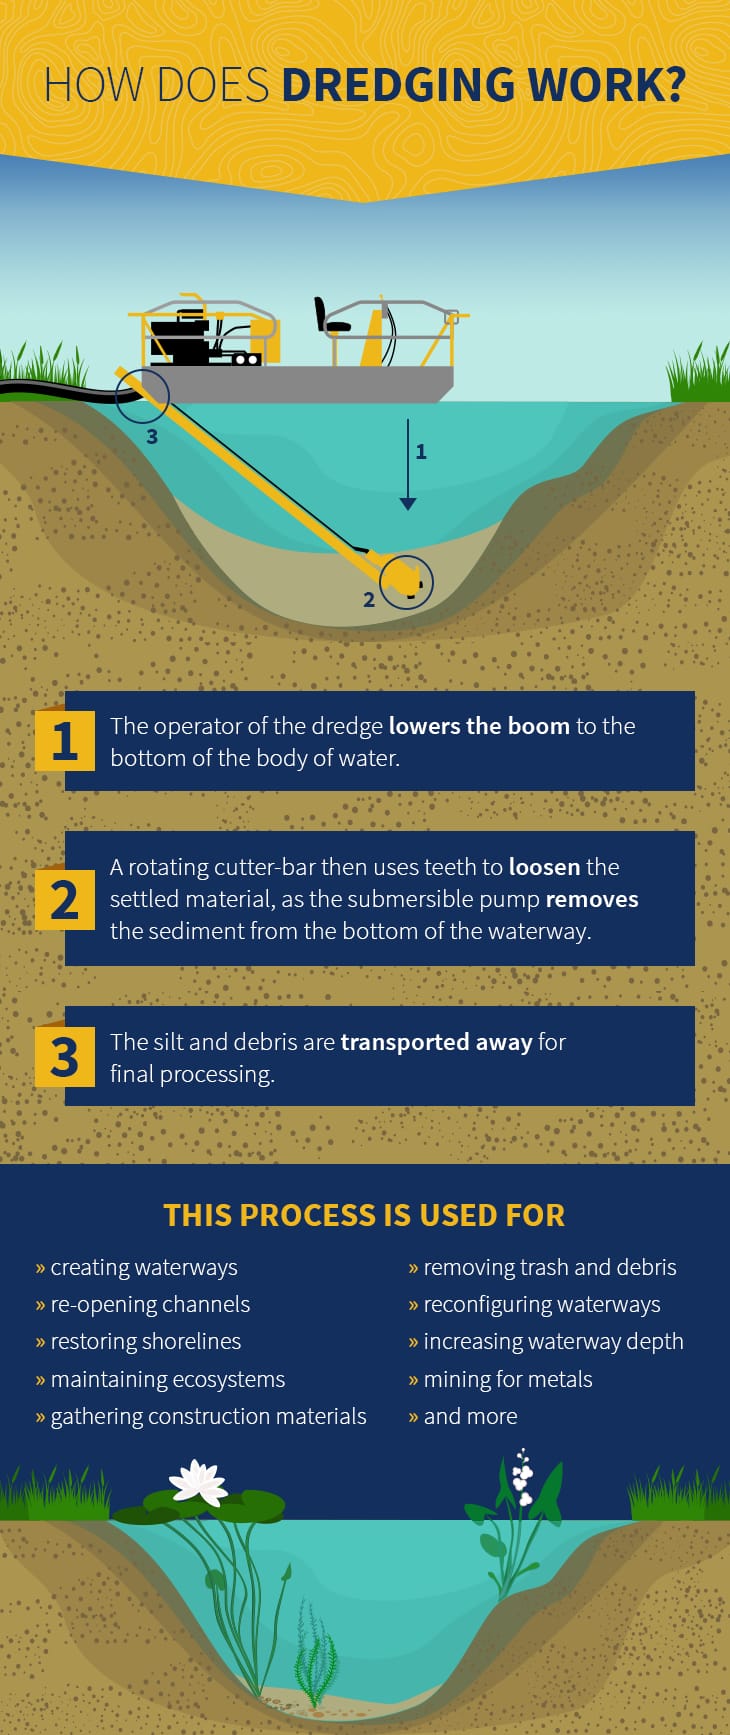 how-does-dredging-work-infographic-on-the-dredging-process-for-sediment-removal